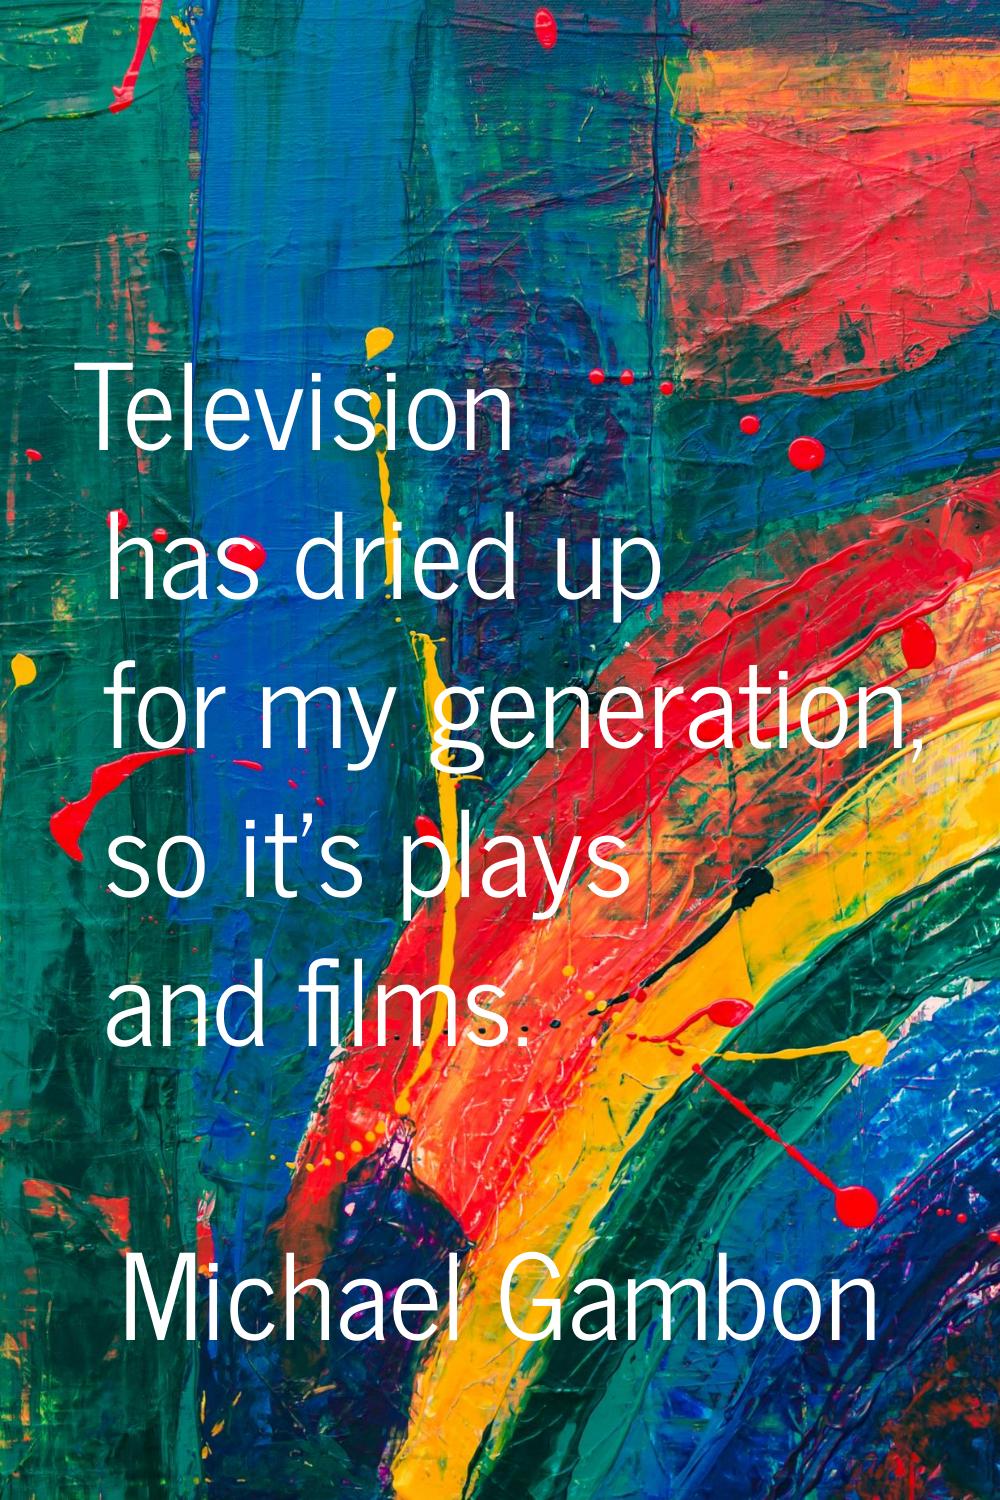 Television has dried up for my generation, so it's plays and films.